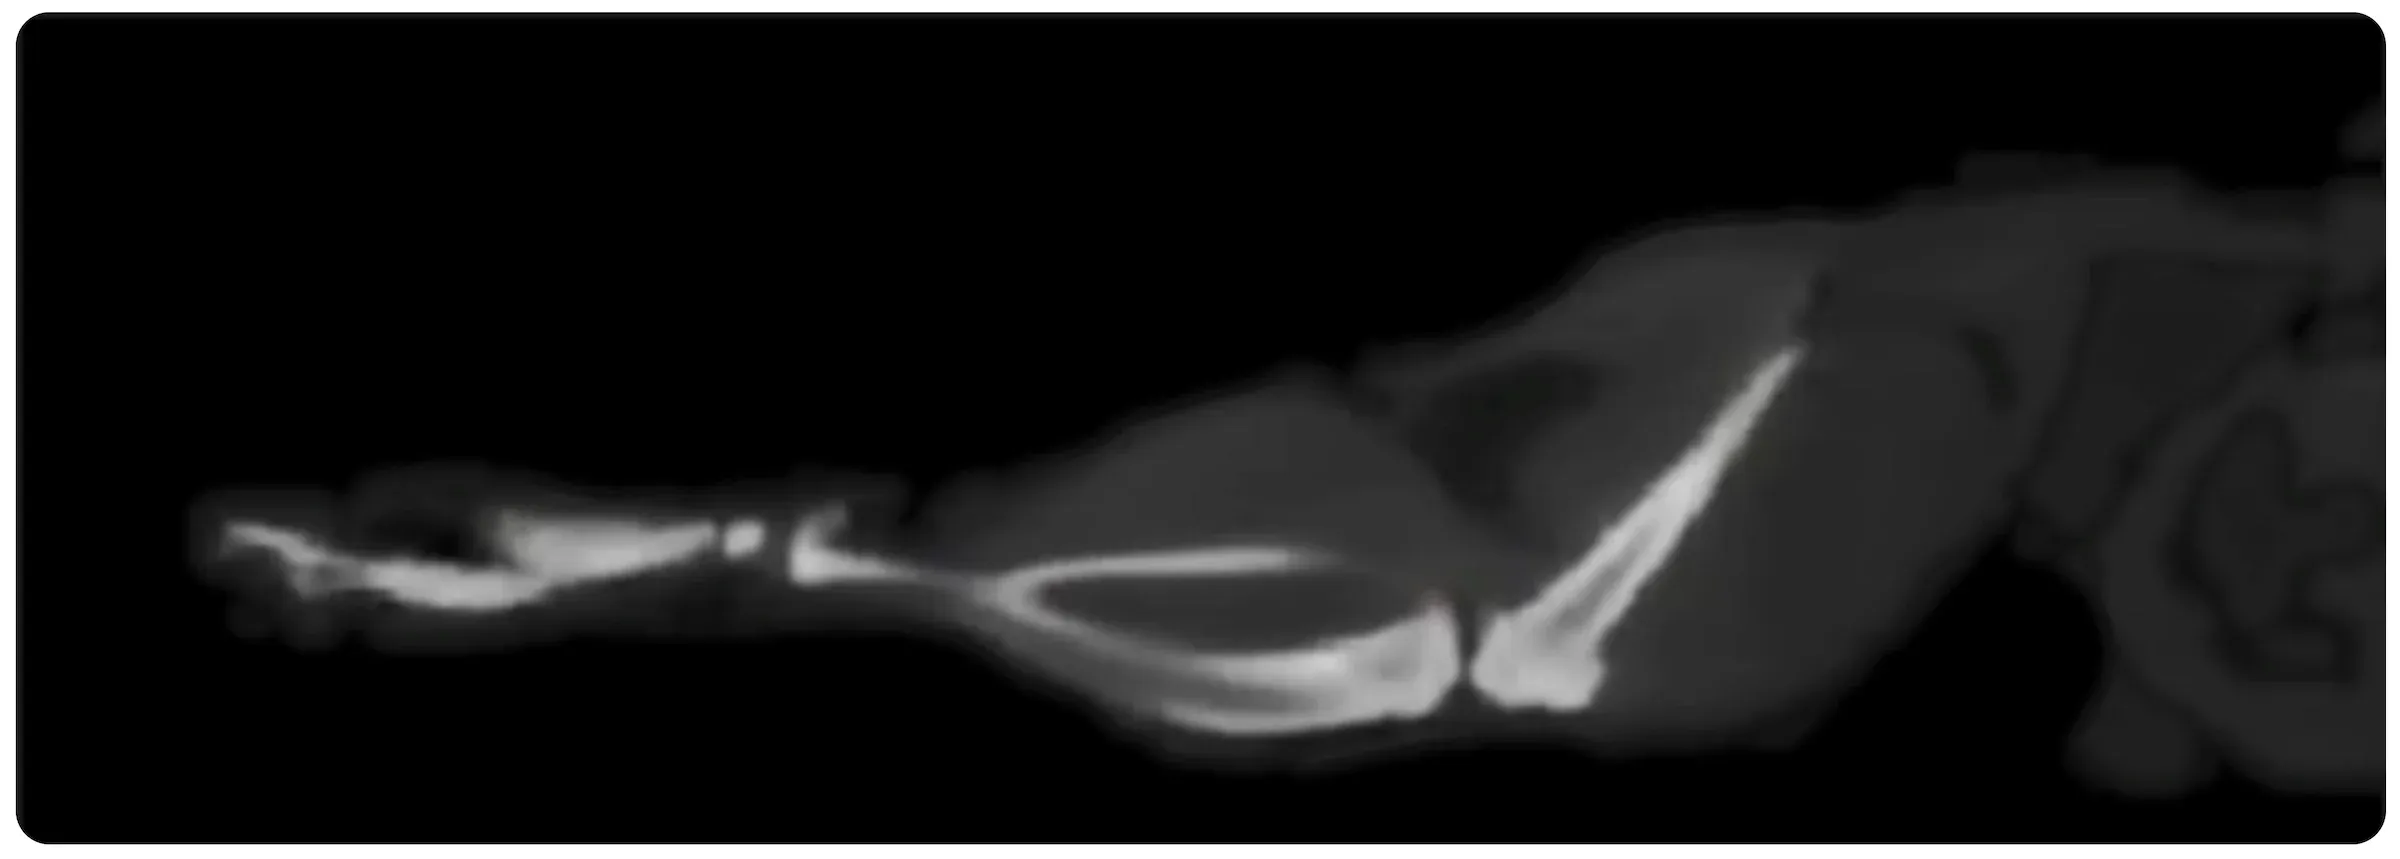 CT - Mouse leg muscles Scan